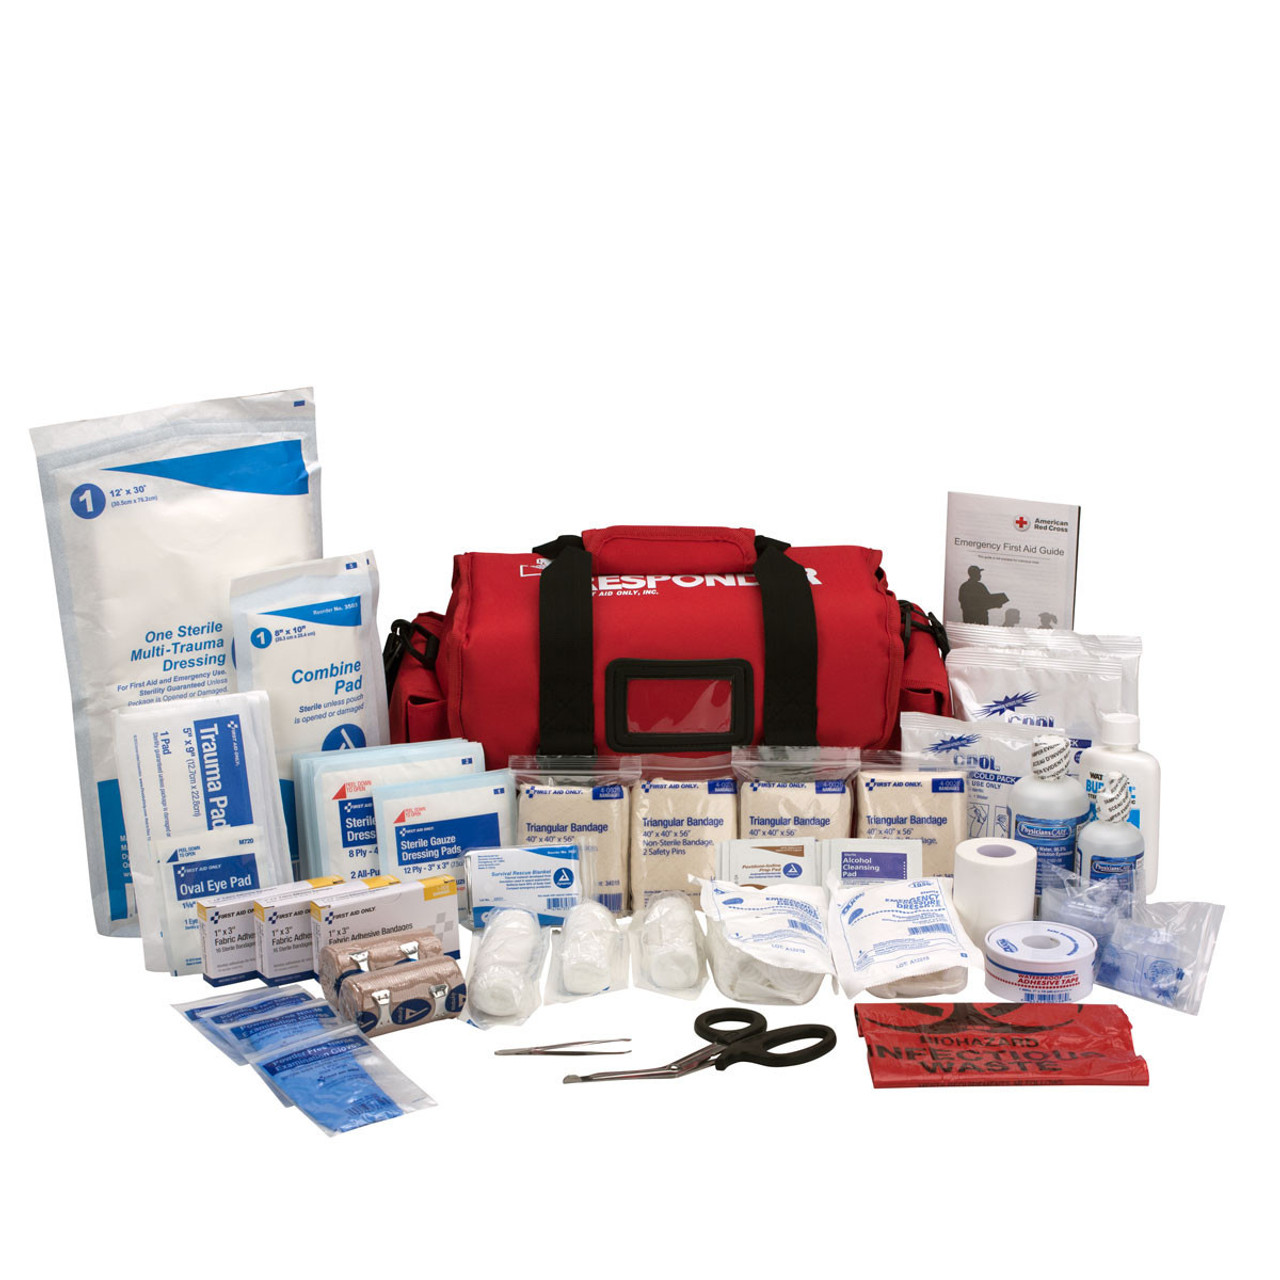 Regulation 7 First Aid Kit in Heavy Duty PVC Bag (5-50 Persons) by  Firstaider - Firstaider